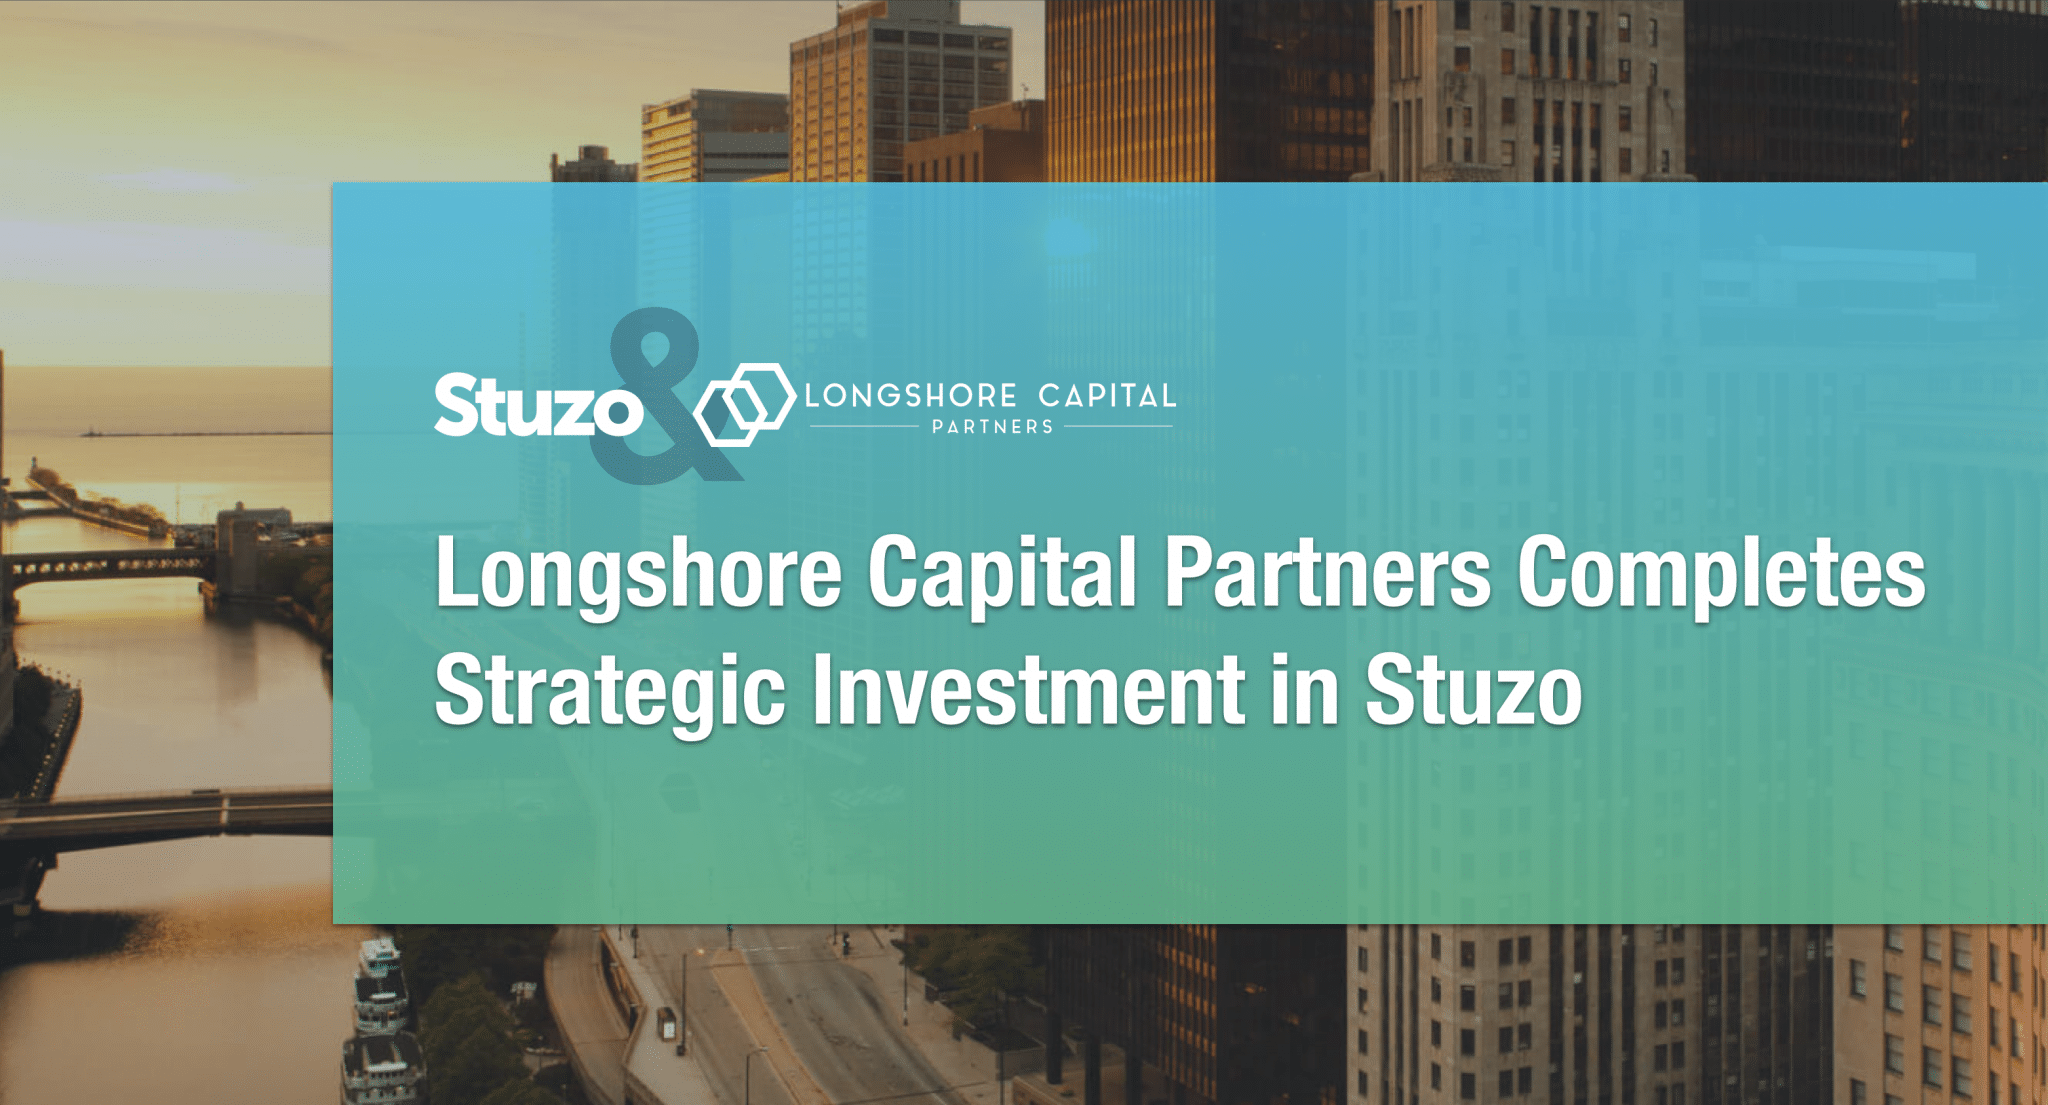 Longshore Capital Partners has made a strategic investment in Stuzo.